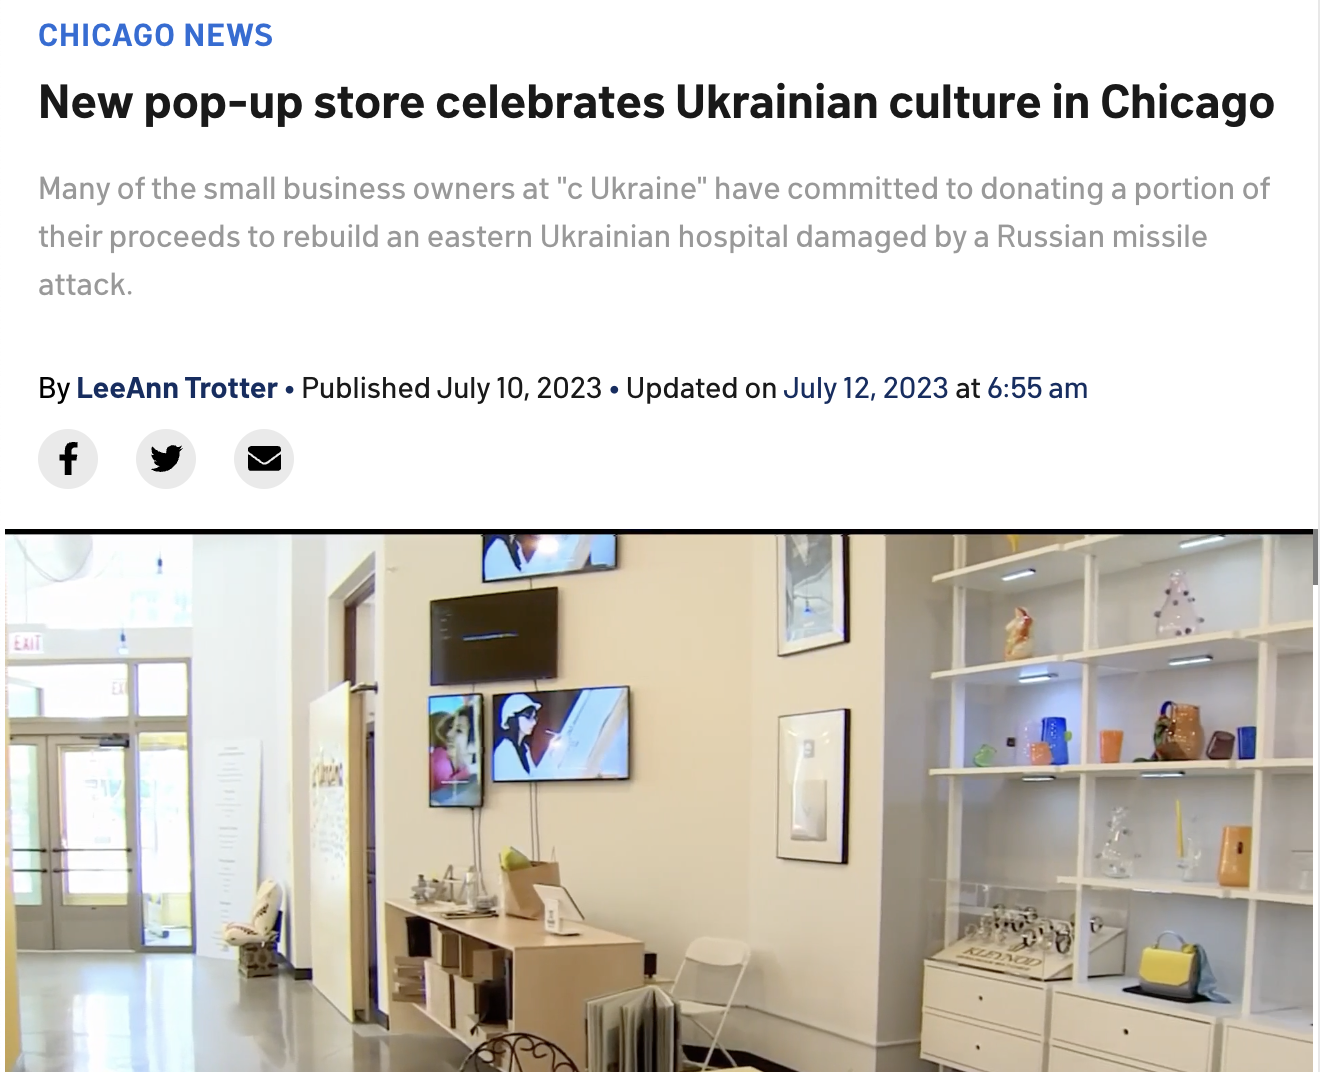 Pop Up Grocer opening shop in Chicago, 2021-04-26